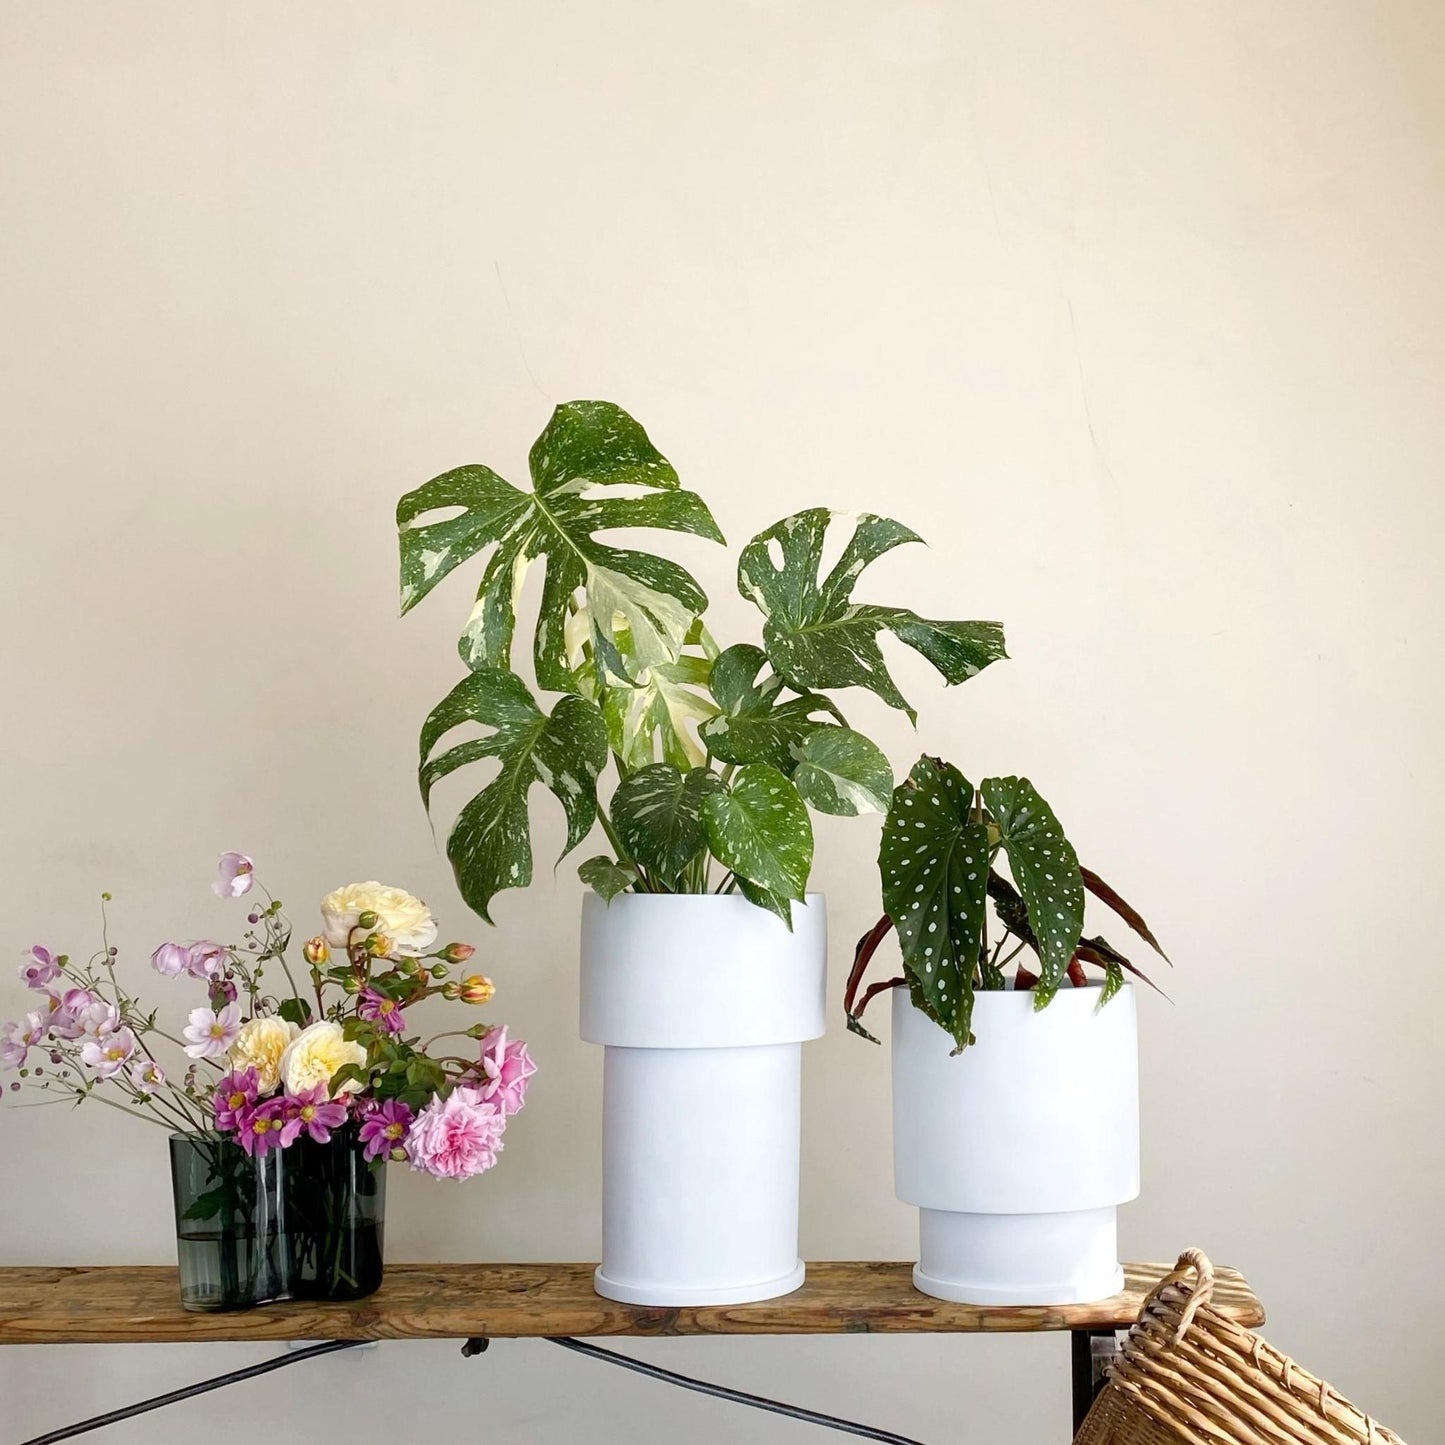 Midi Tall Tower Planter by The Plant Society x Capra Designs- Totem Collection - - THE PLANT SOCIETY